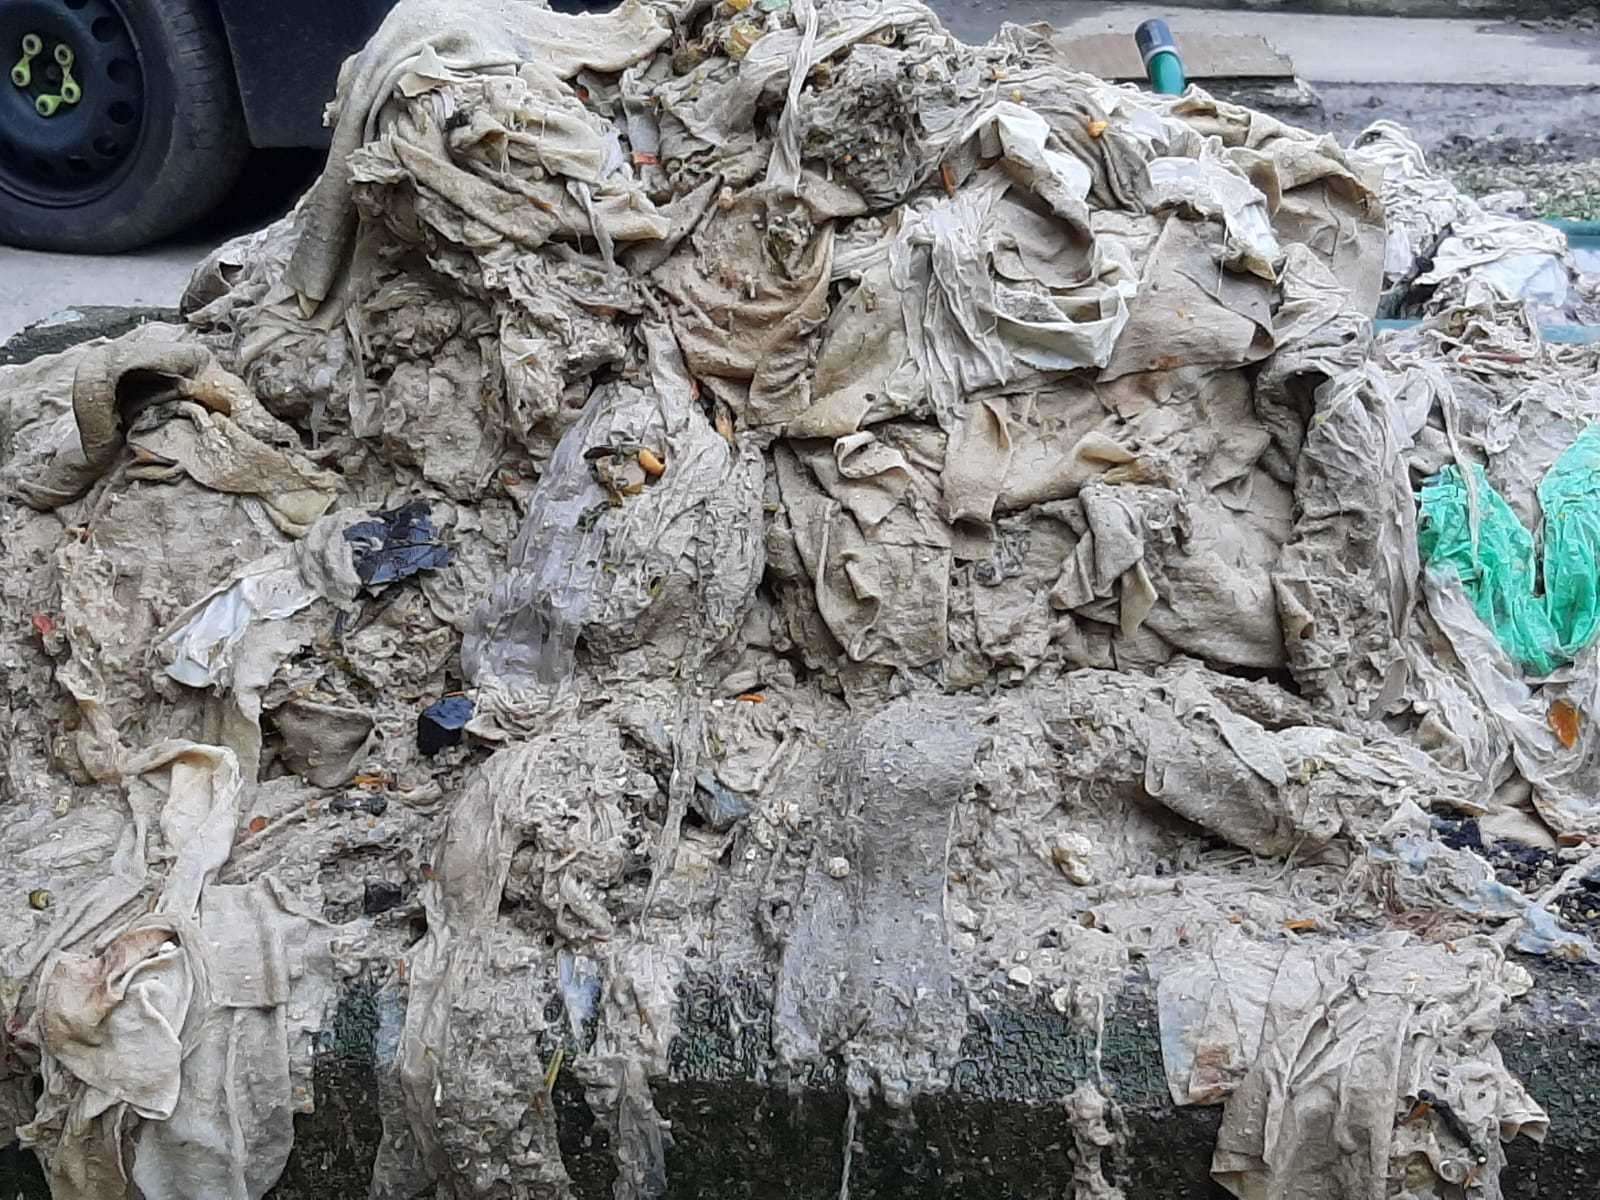 Wet wipes containing plastic have been declared a menace to the environment.